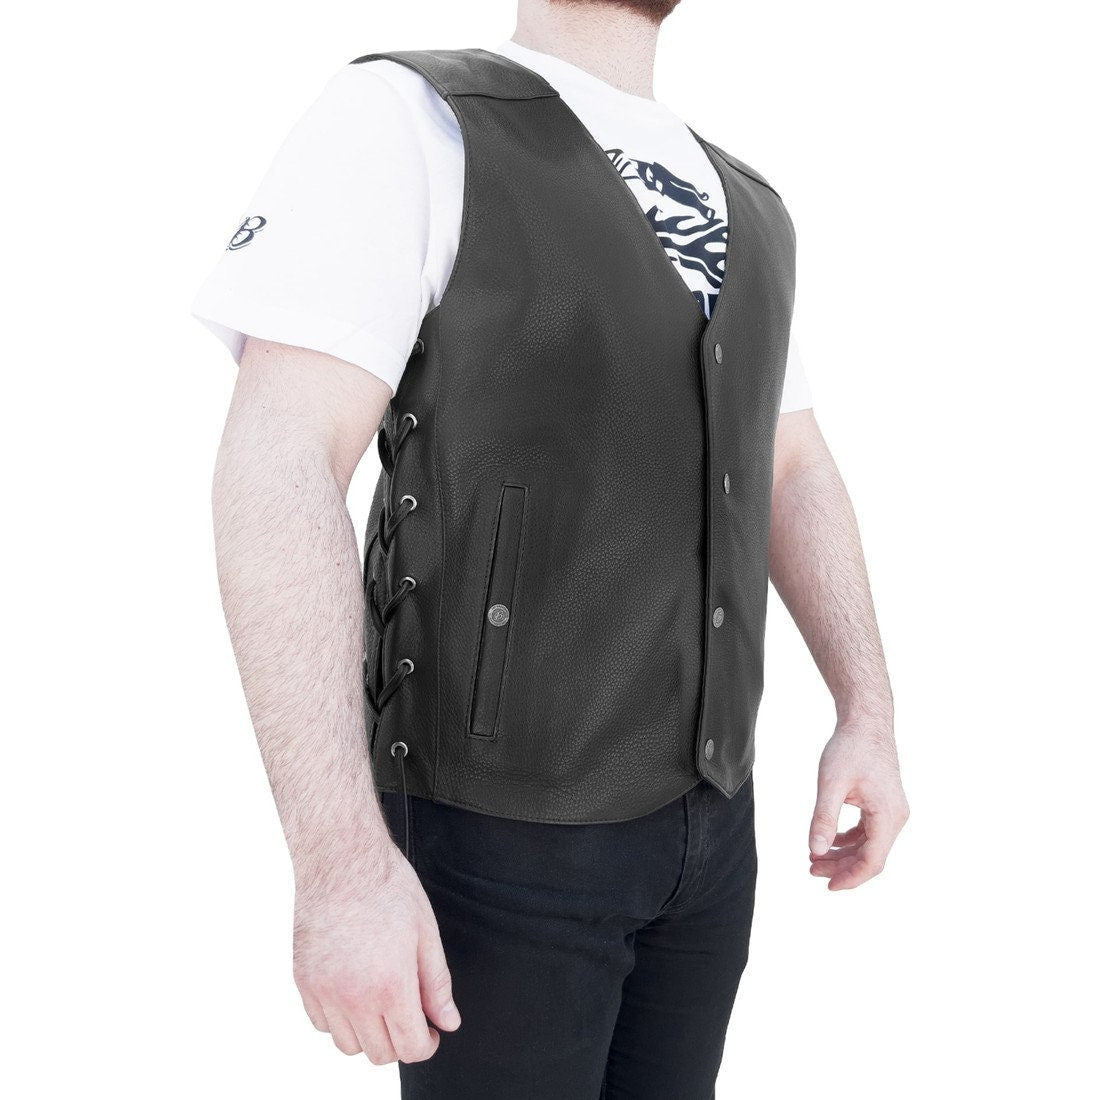 Black Vest | Leather Vest with Gun Pockets | Tailored to Your Size | Handmade | Leather Vest |  Cowhide skin | Gifts For Men  99percenthandmade   